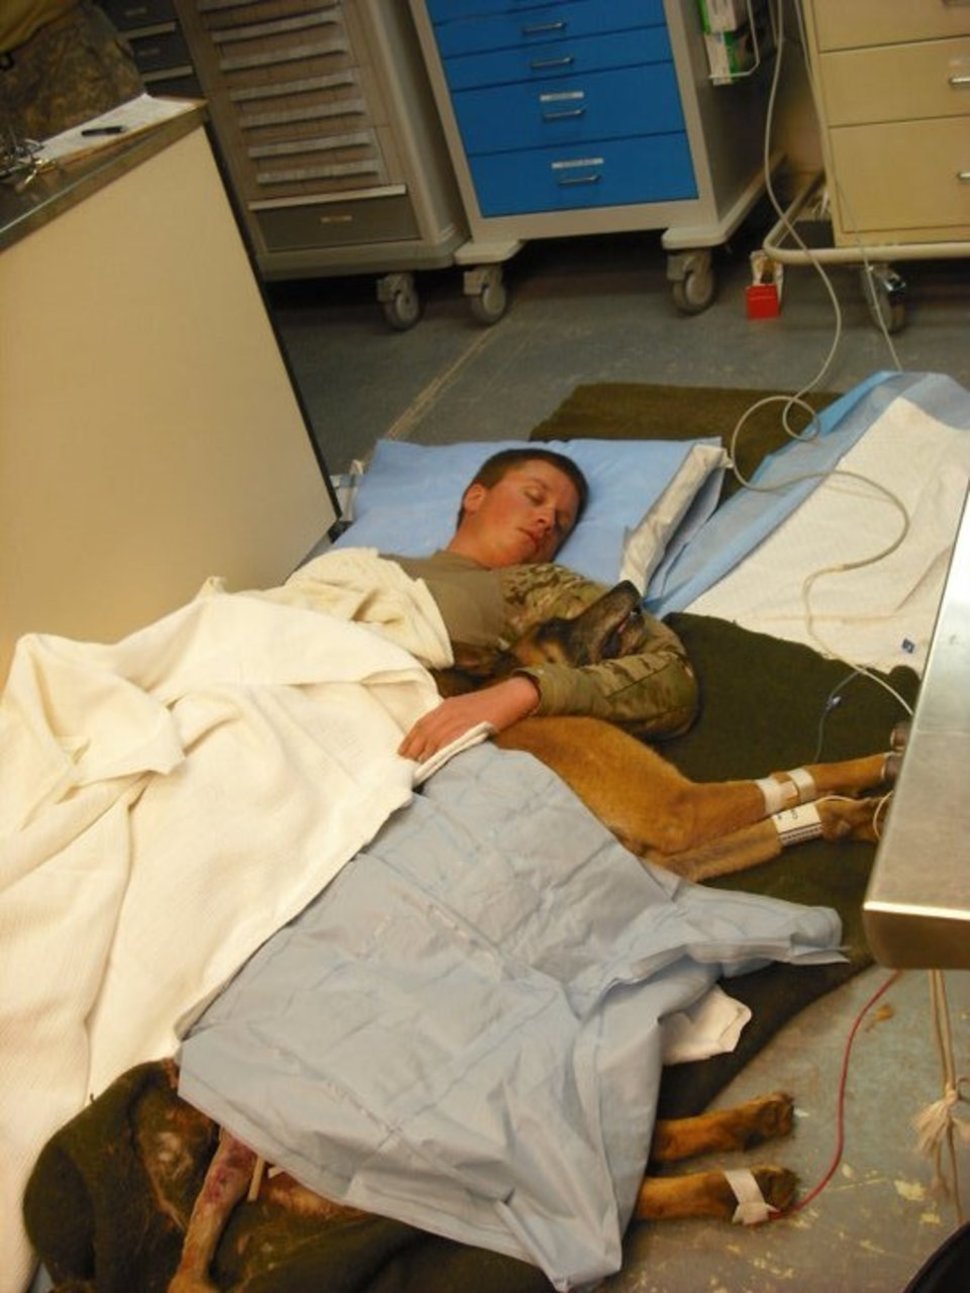 Petty Officer Ryan Lee and Valdo snuggle on a hospital floor after a lucky escape.